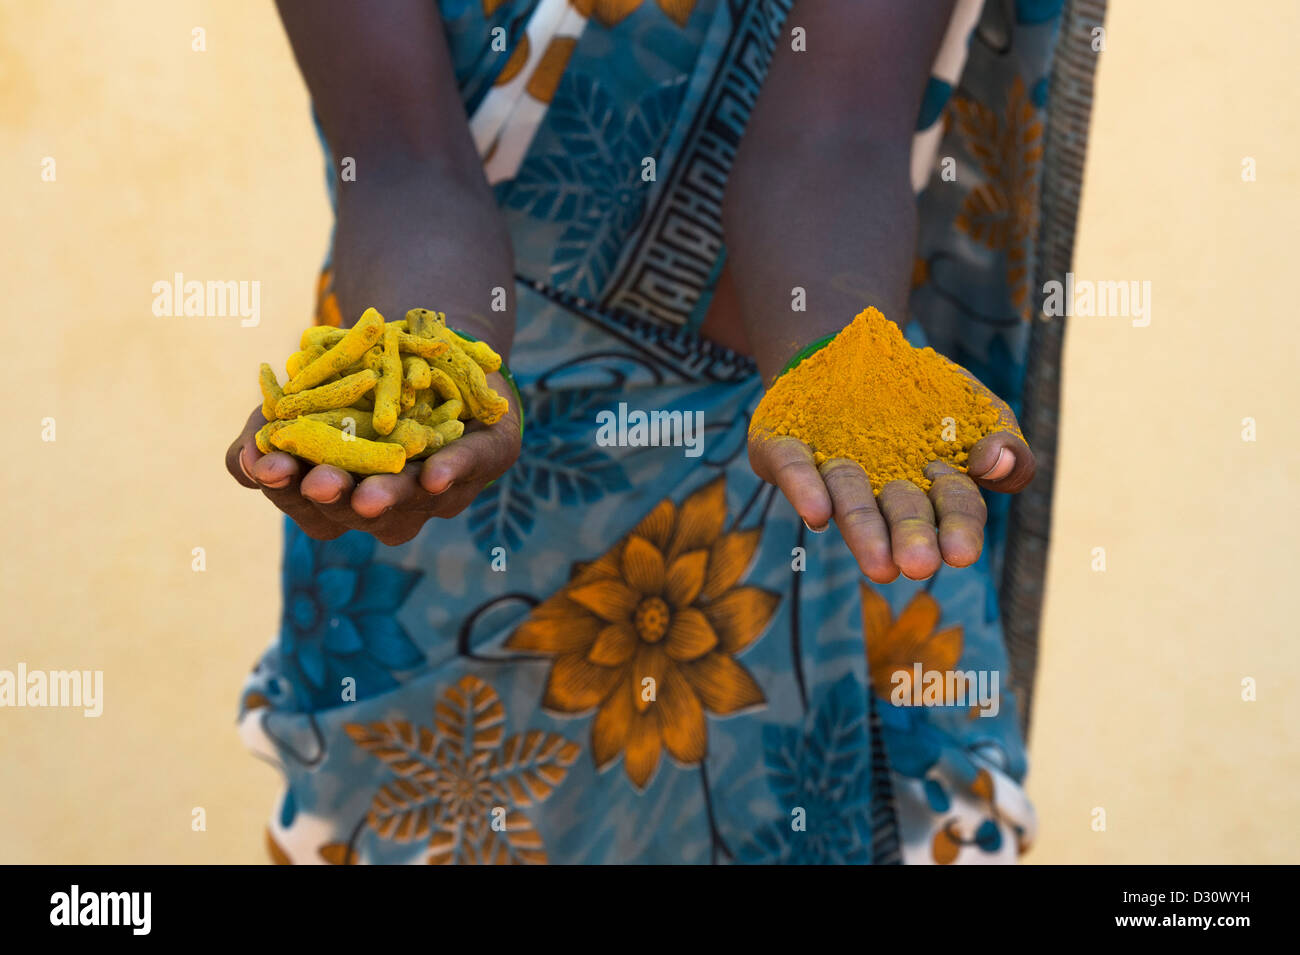 Rural Indian village woman holding Dried Turmeric roots / rhizomes and Turmeric powder in her hands. Andhra Pradesh, India Stock Photo